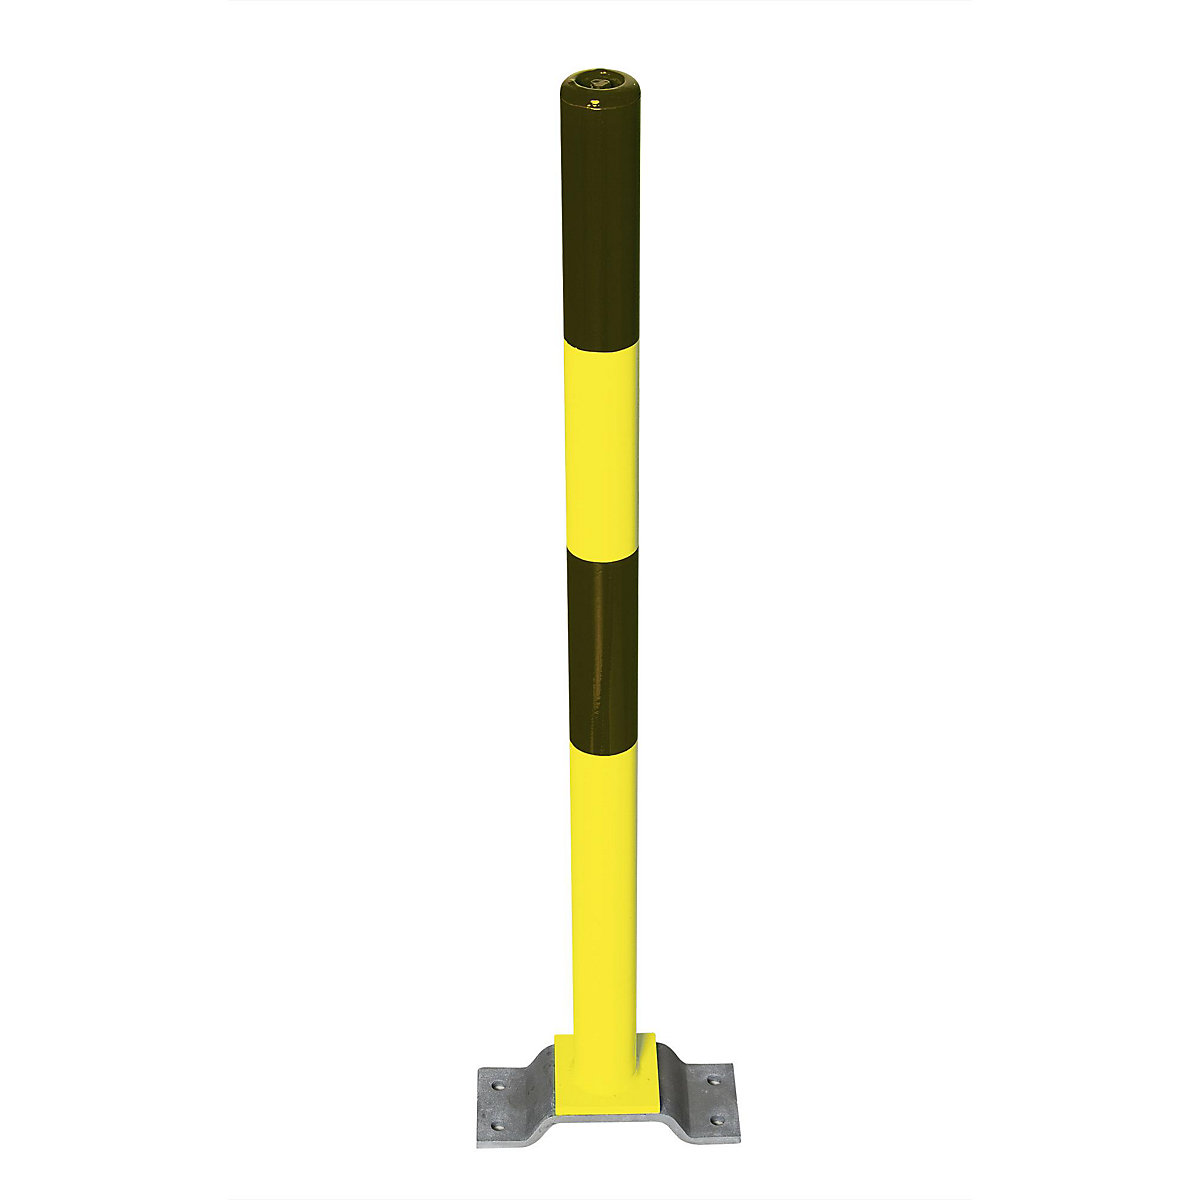 Barrier post made of steel, for bolting in place, Ø 60 mm, black/yellow, 1 chain eyelet-6